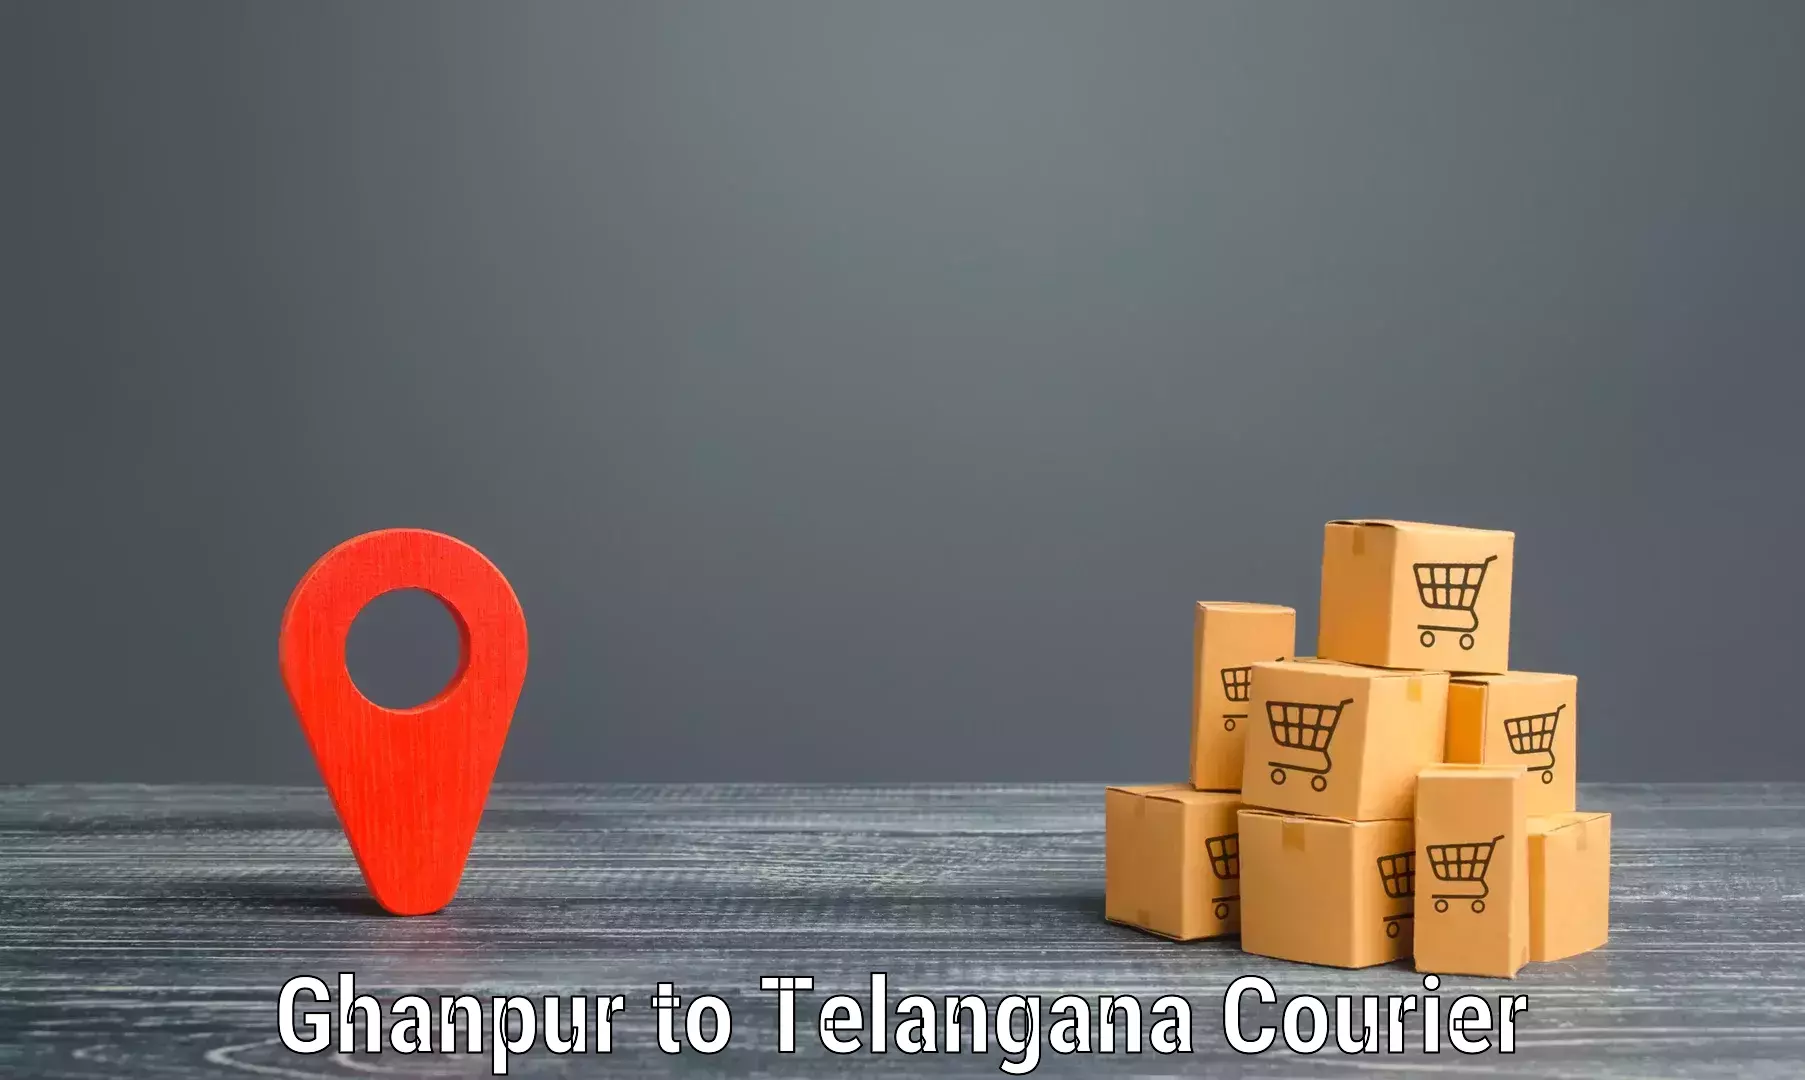 Package delivery network Ghanpur to Secunderabad